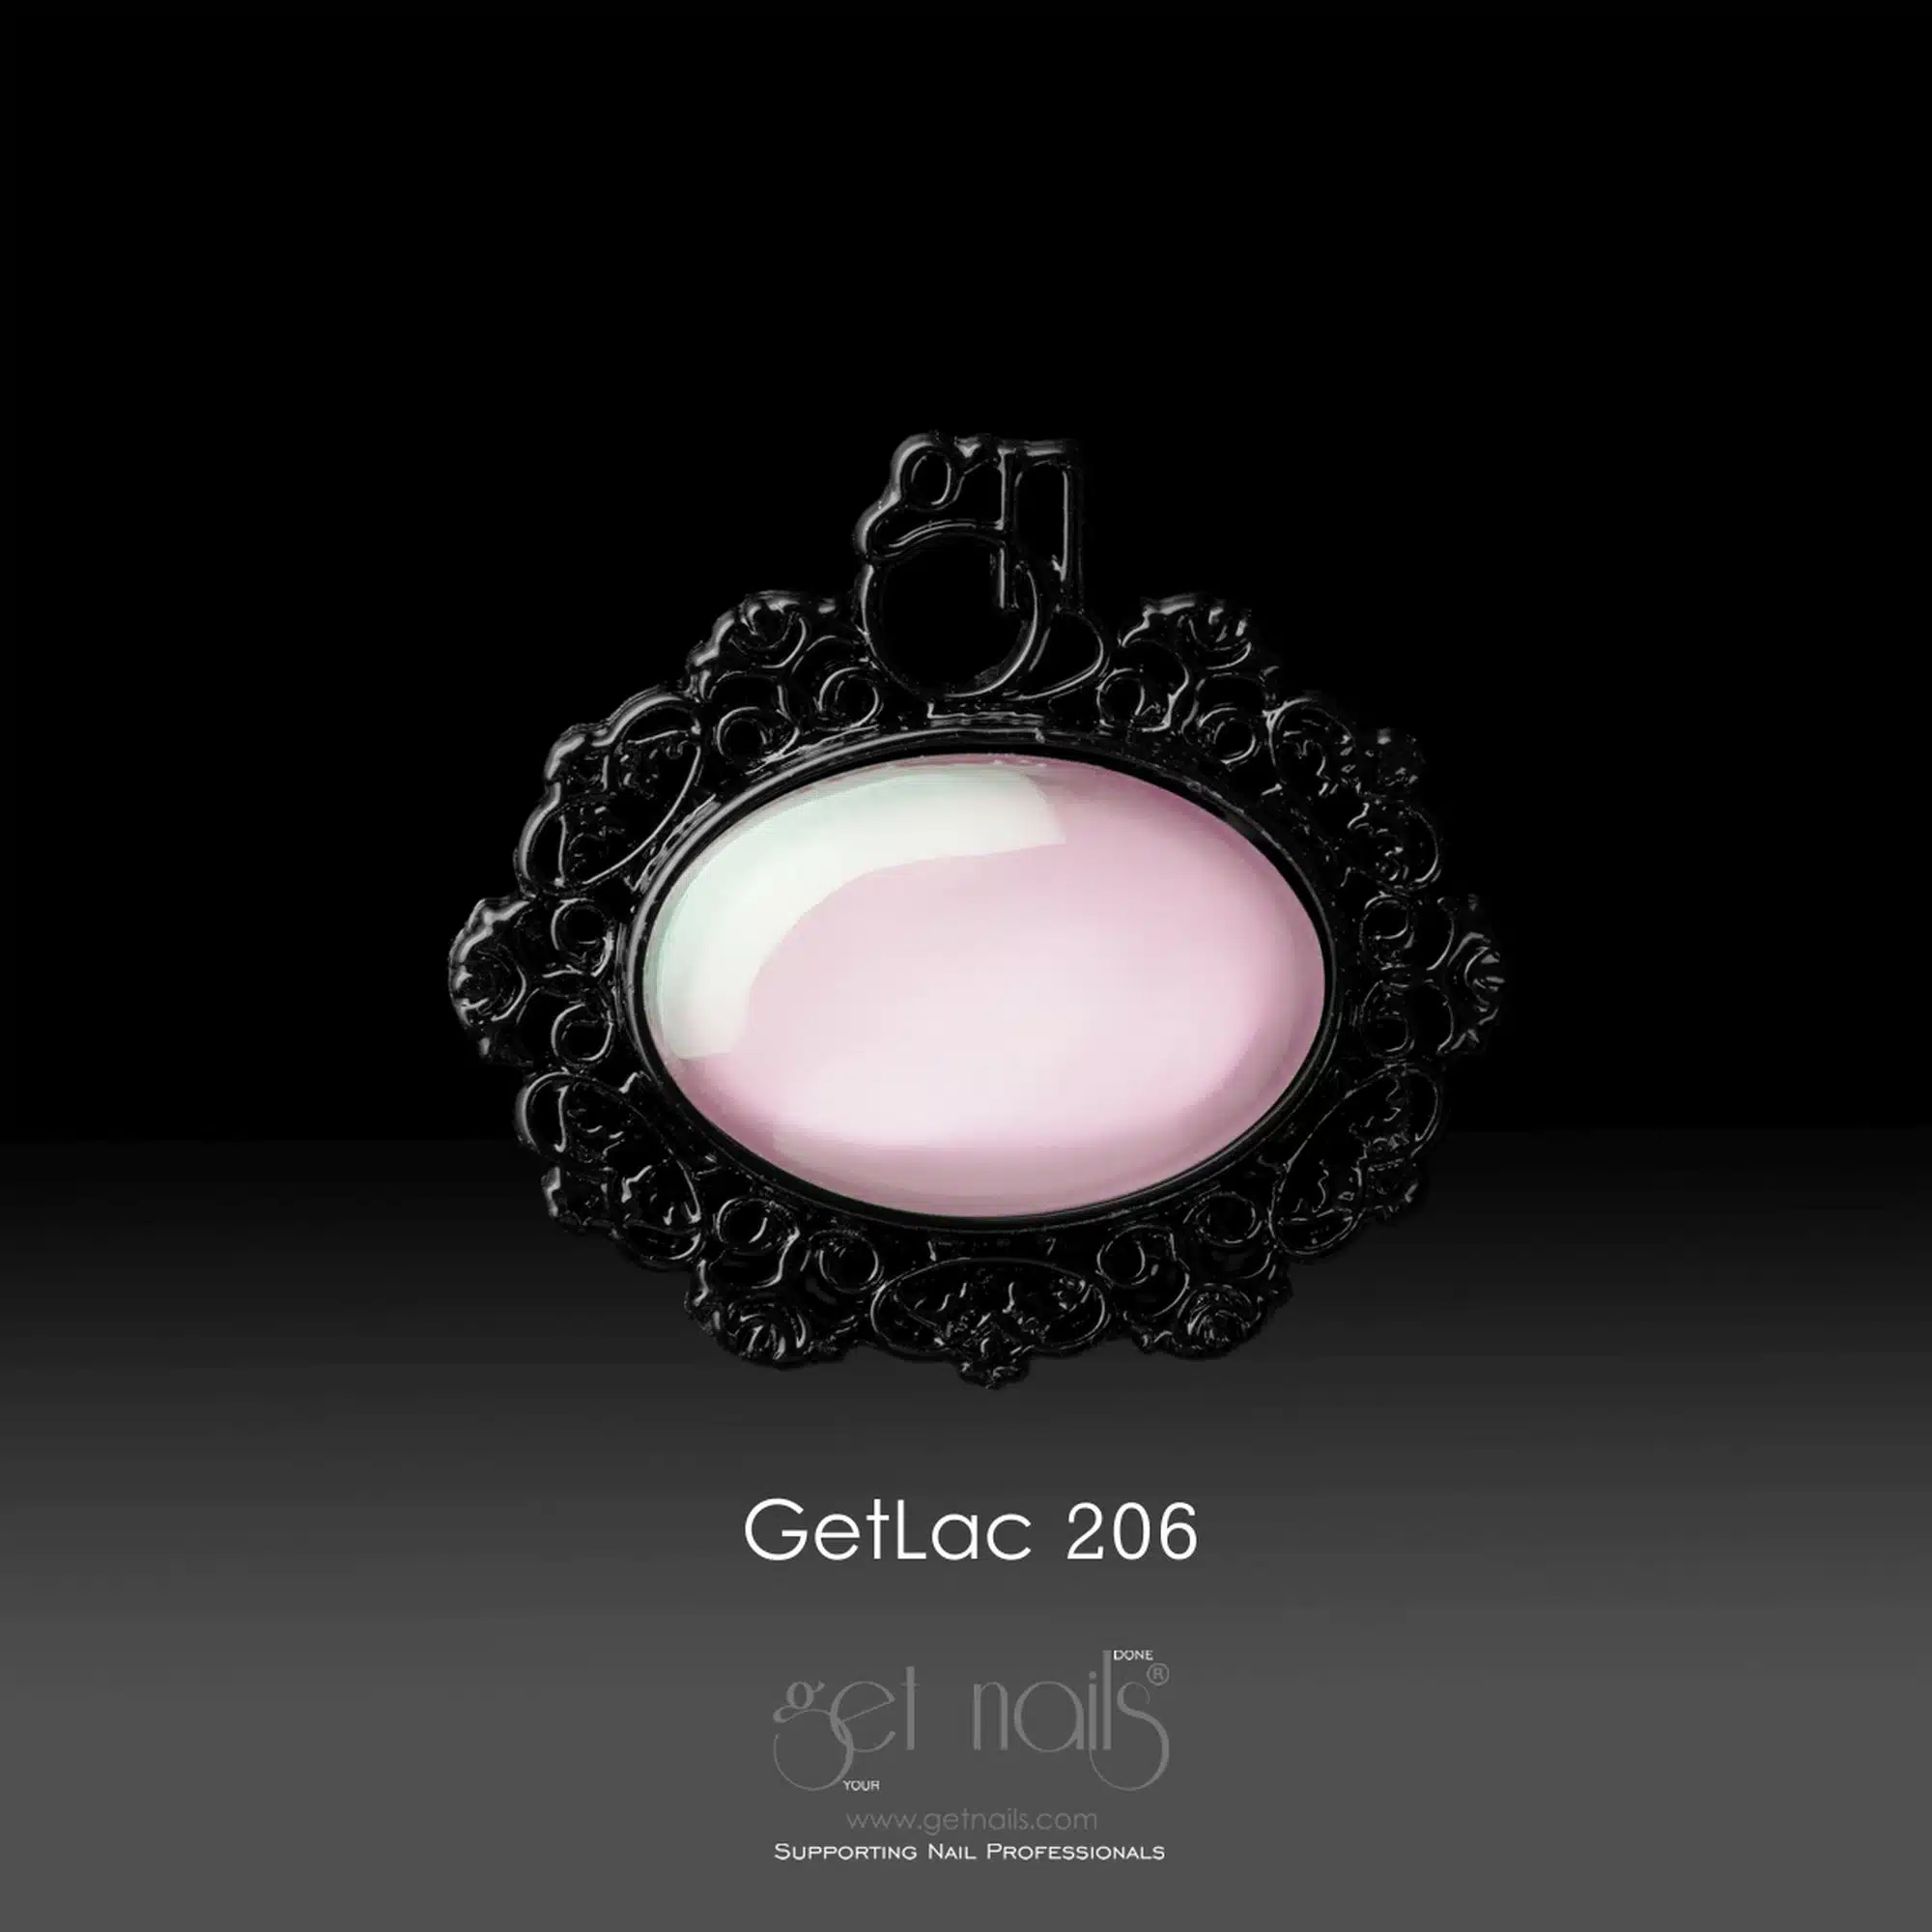 Get Nails Austria - GetLac 206 Candy Macaroon 15г